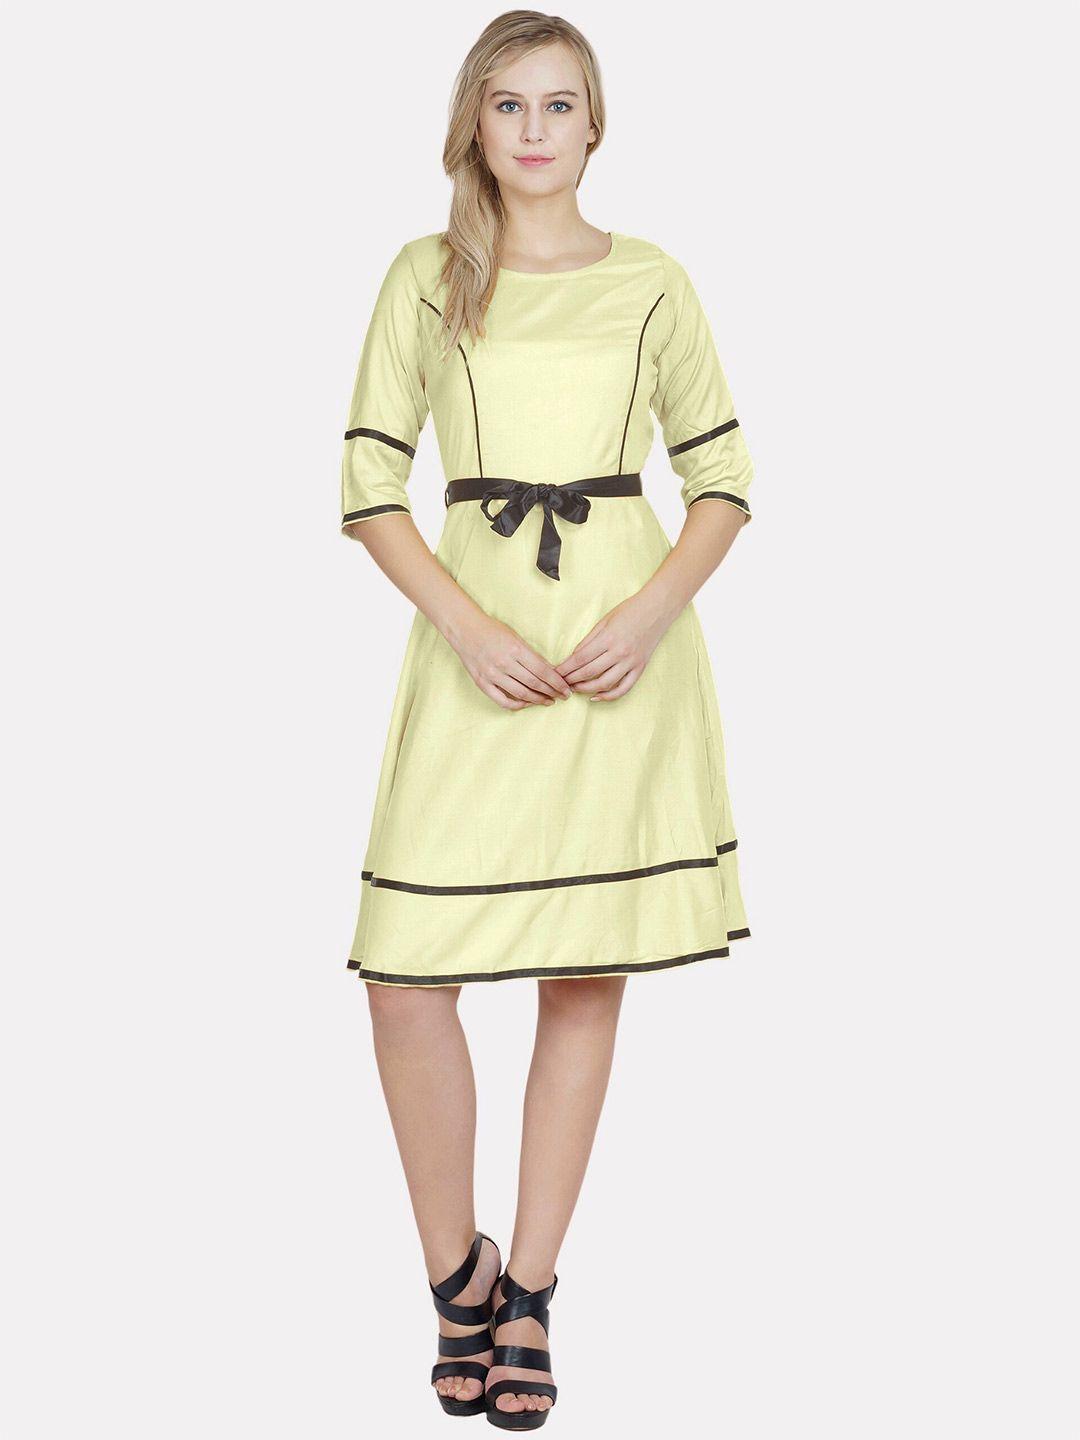 patrorna belted fit and flare dress